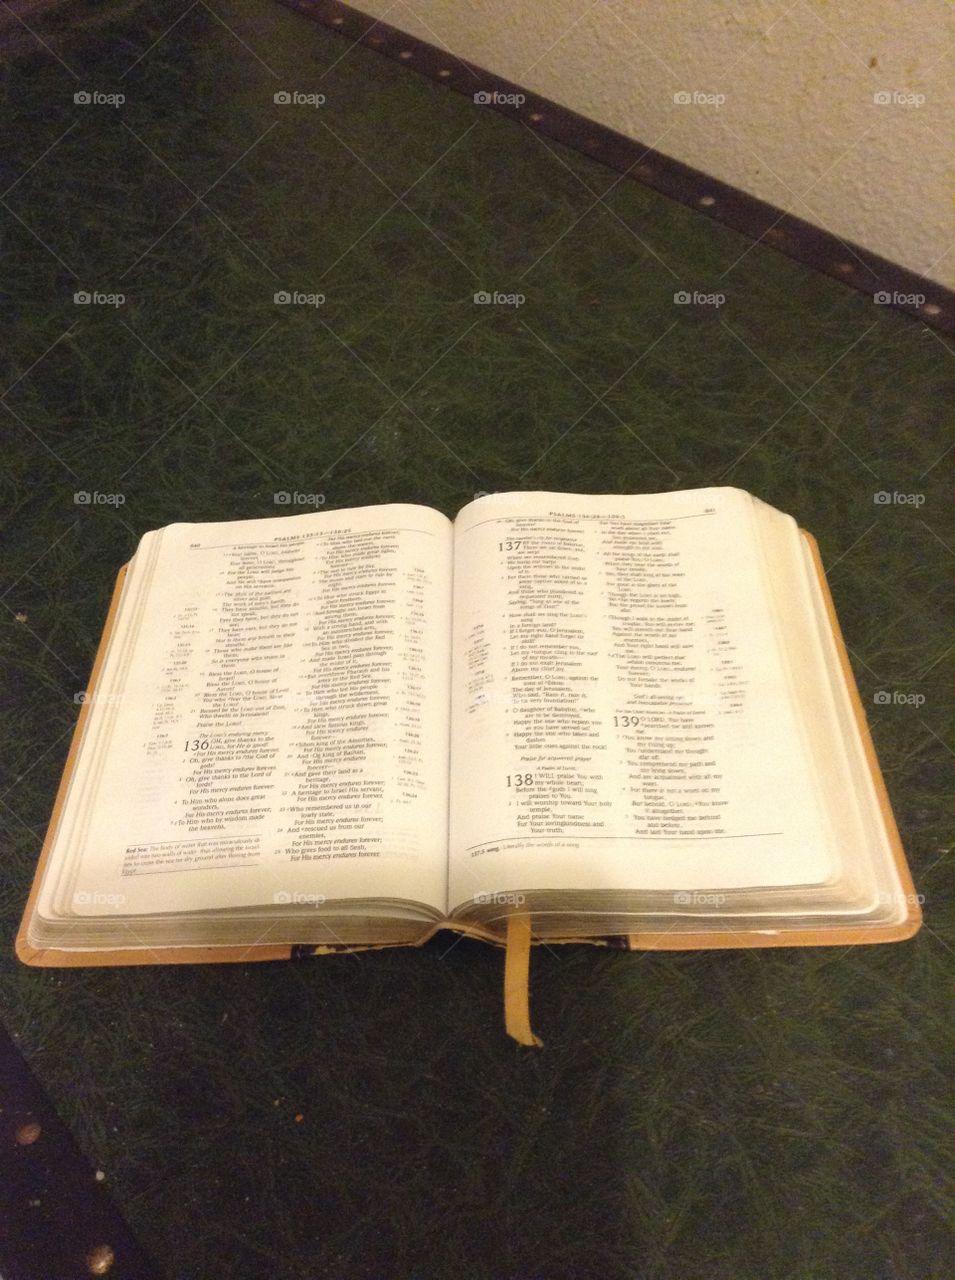 This is called a Holy Bible, read it, live it, remember it and preach it, there's nothing but life in it's doctrine!